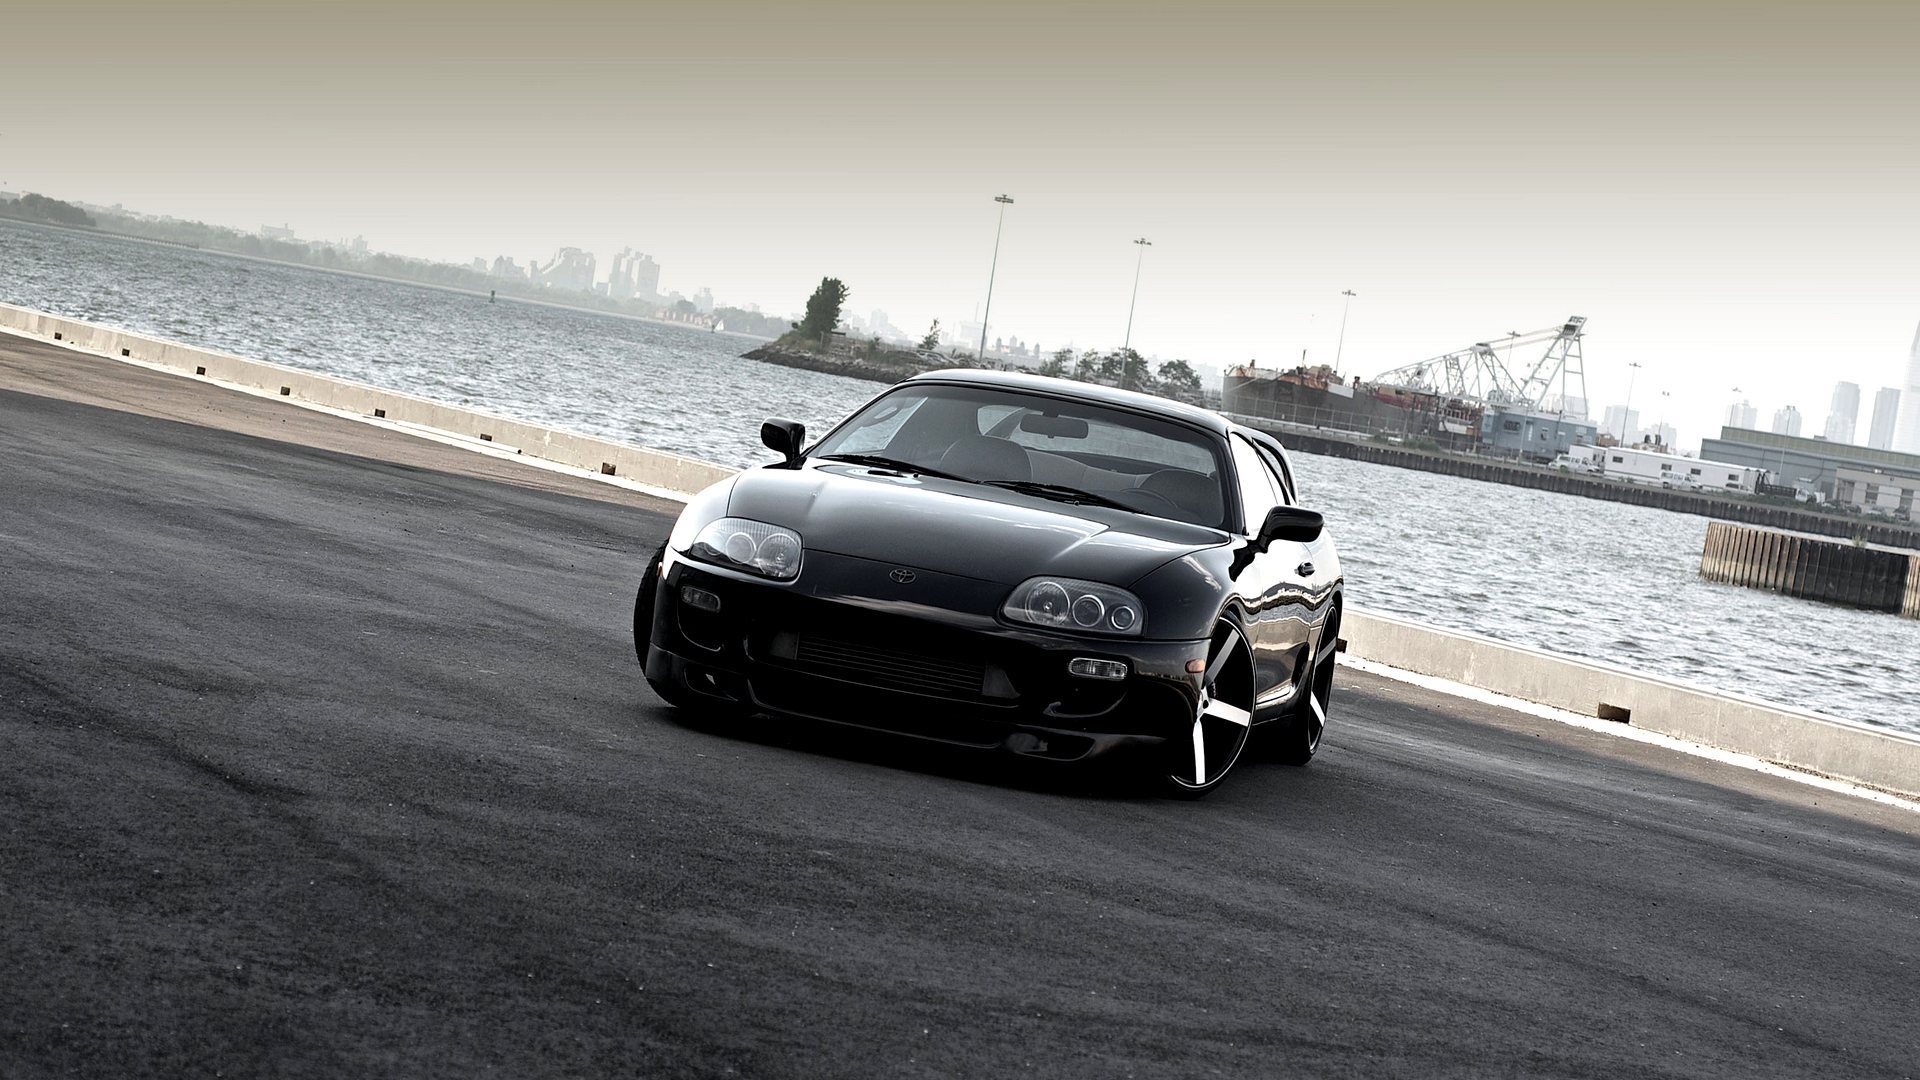 Car Images, Hd Car Photos, Widescreen, Tuning, Engines, - Iphone Wallpapers Toyota Supra , HD Wallpaper & Backgrounds